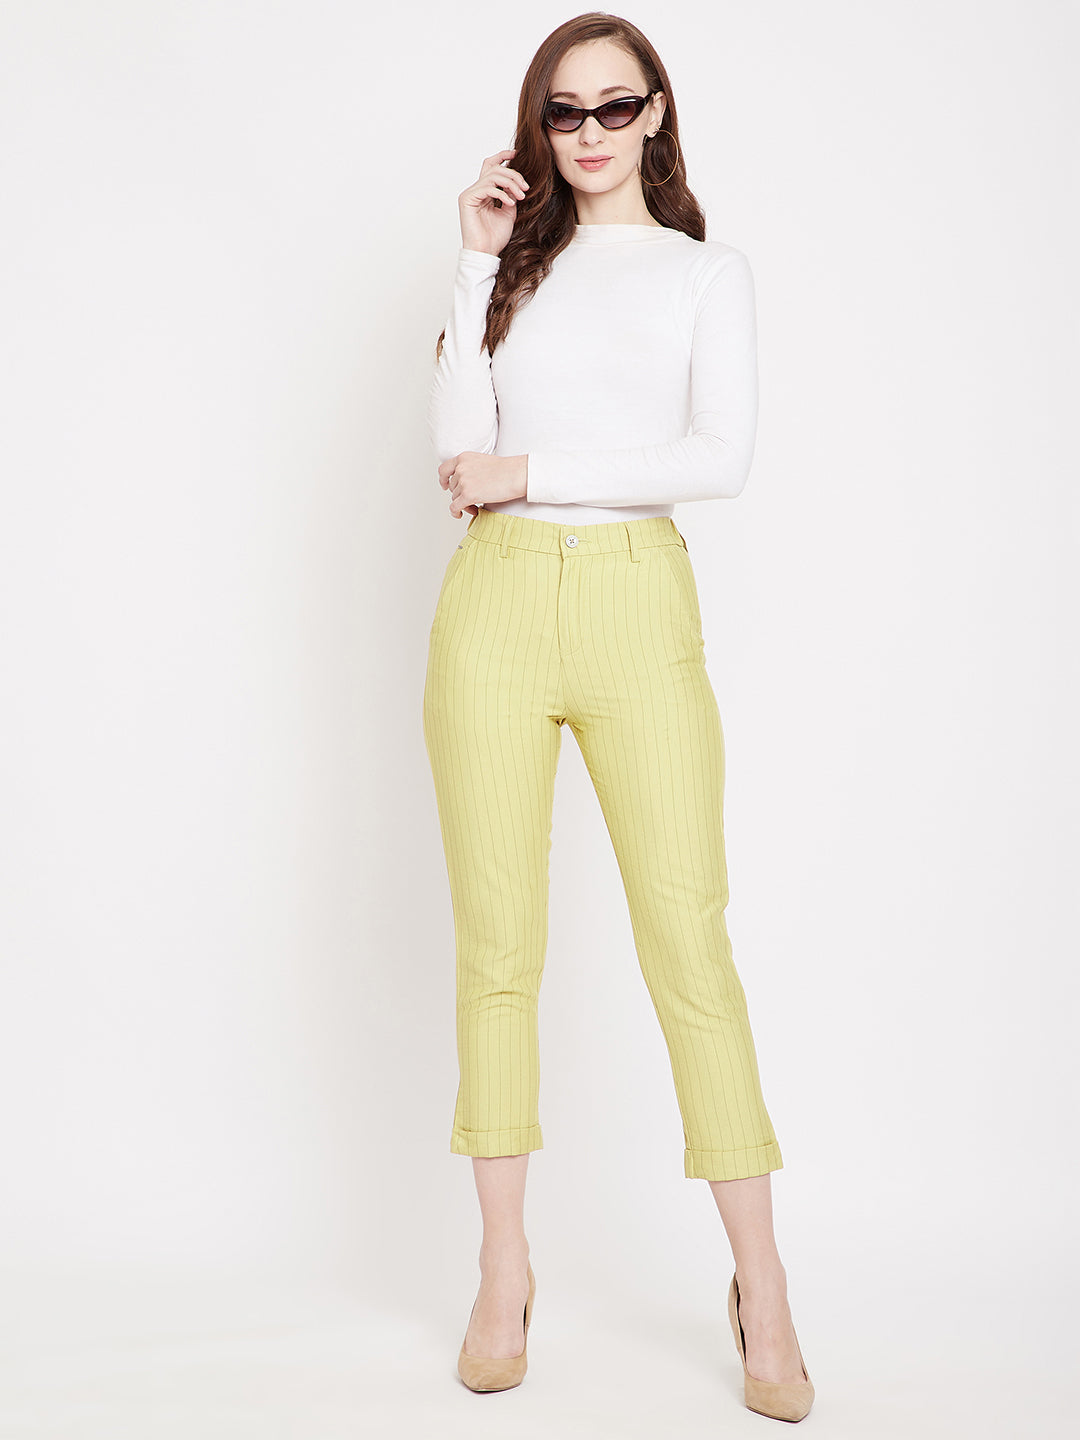 Buy online White Striped Trouser from bottom wear for Women by Vmart for  299 at 0 off  2023 Limeroadcom